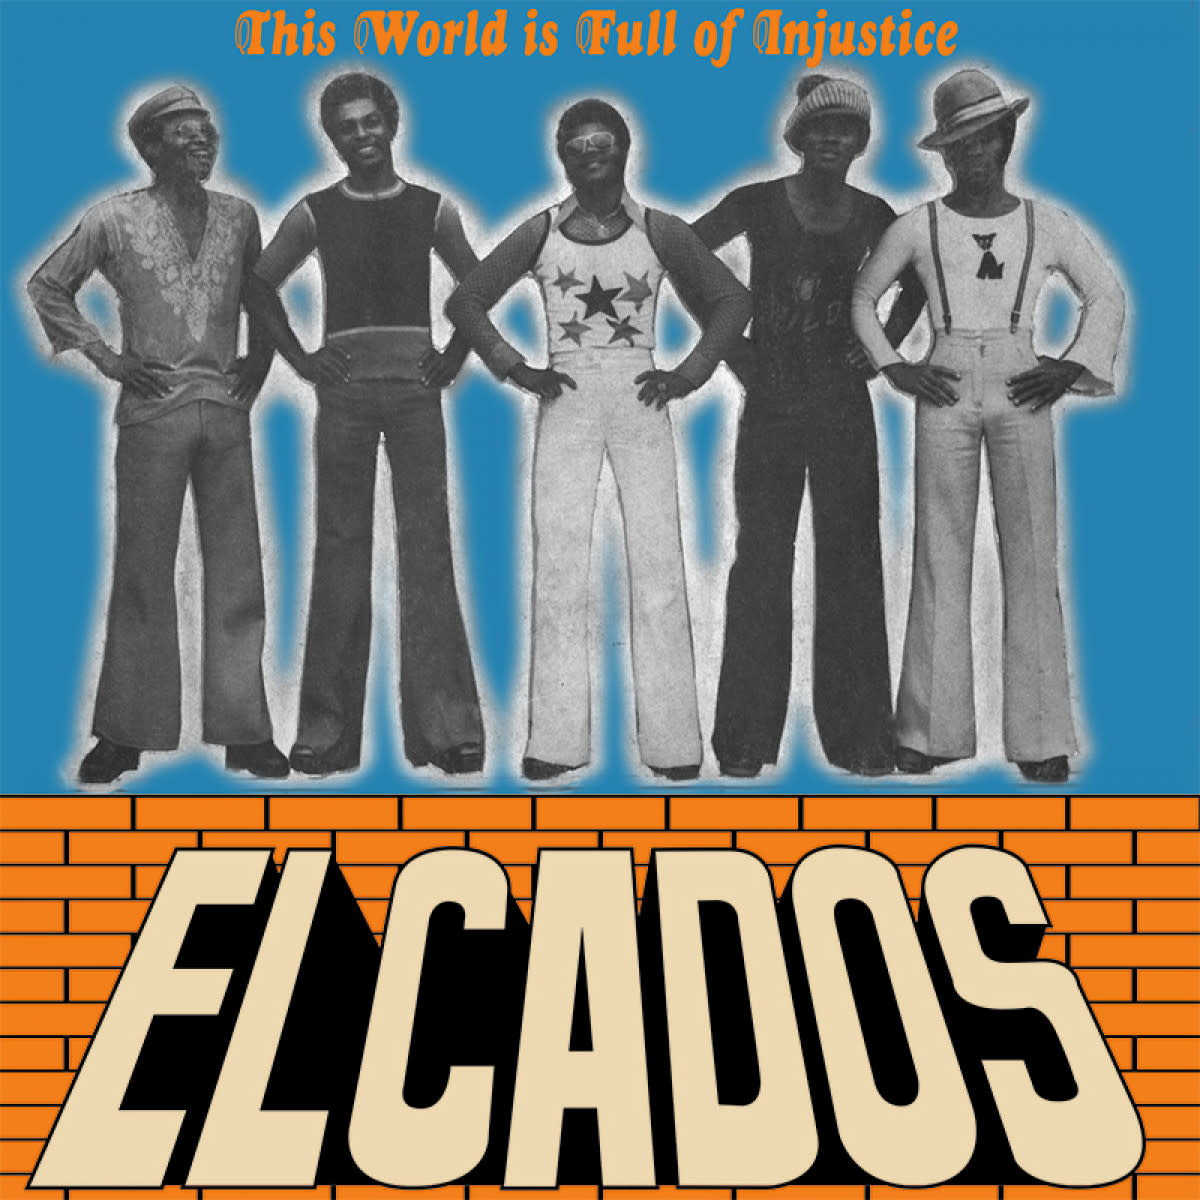 Afrodelic Elcados - This World Is Full of Injustice